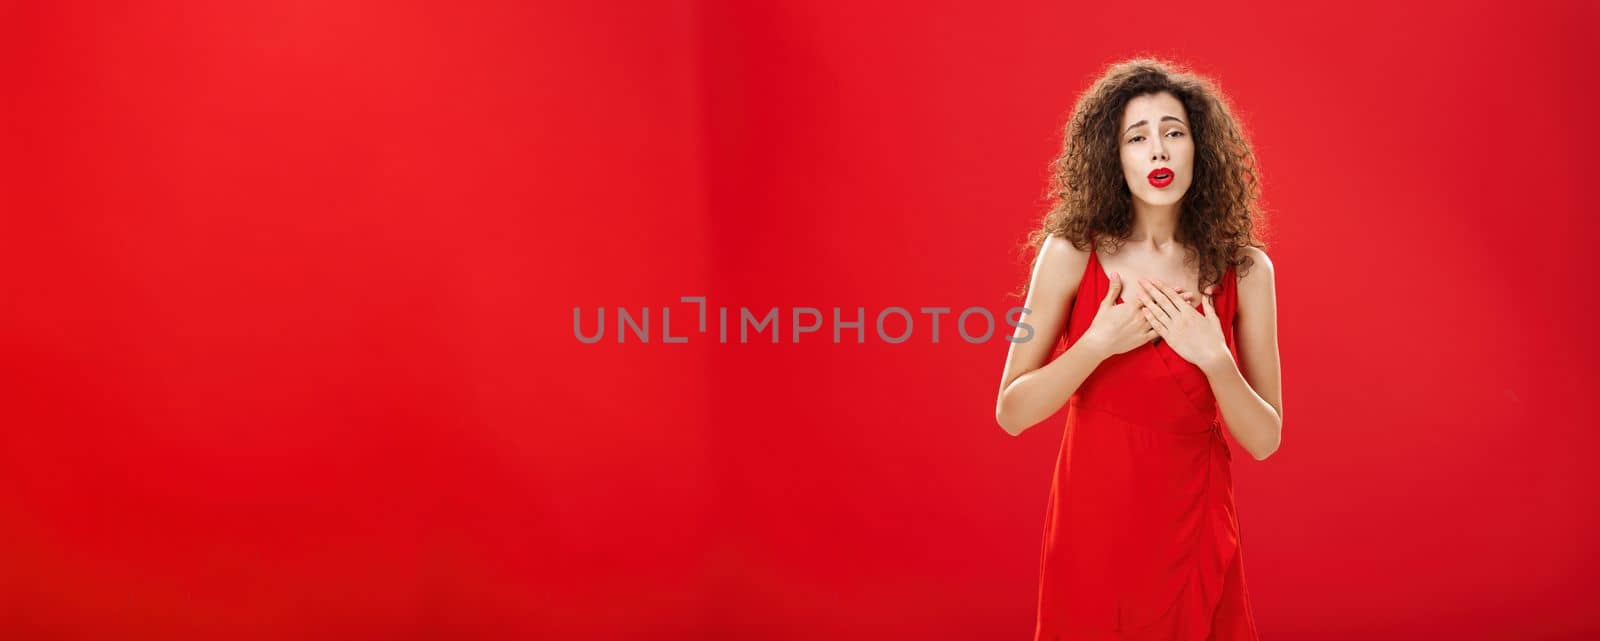 Portrait of touched elegant and stylish curly-haired adult. woman receiving compliments holding hands on chest in grateful and thankful pose hearing heartwarming speech in her honor over red background.